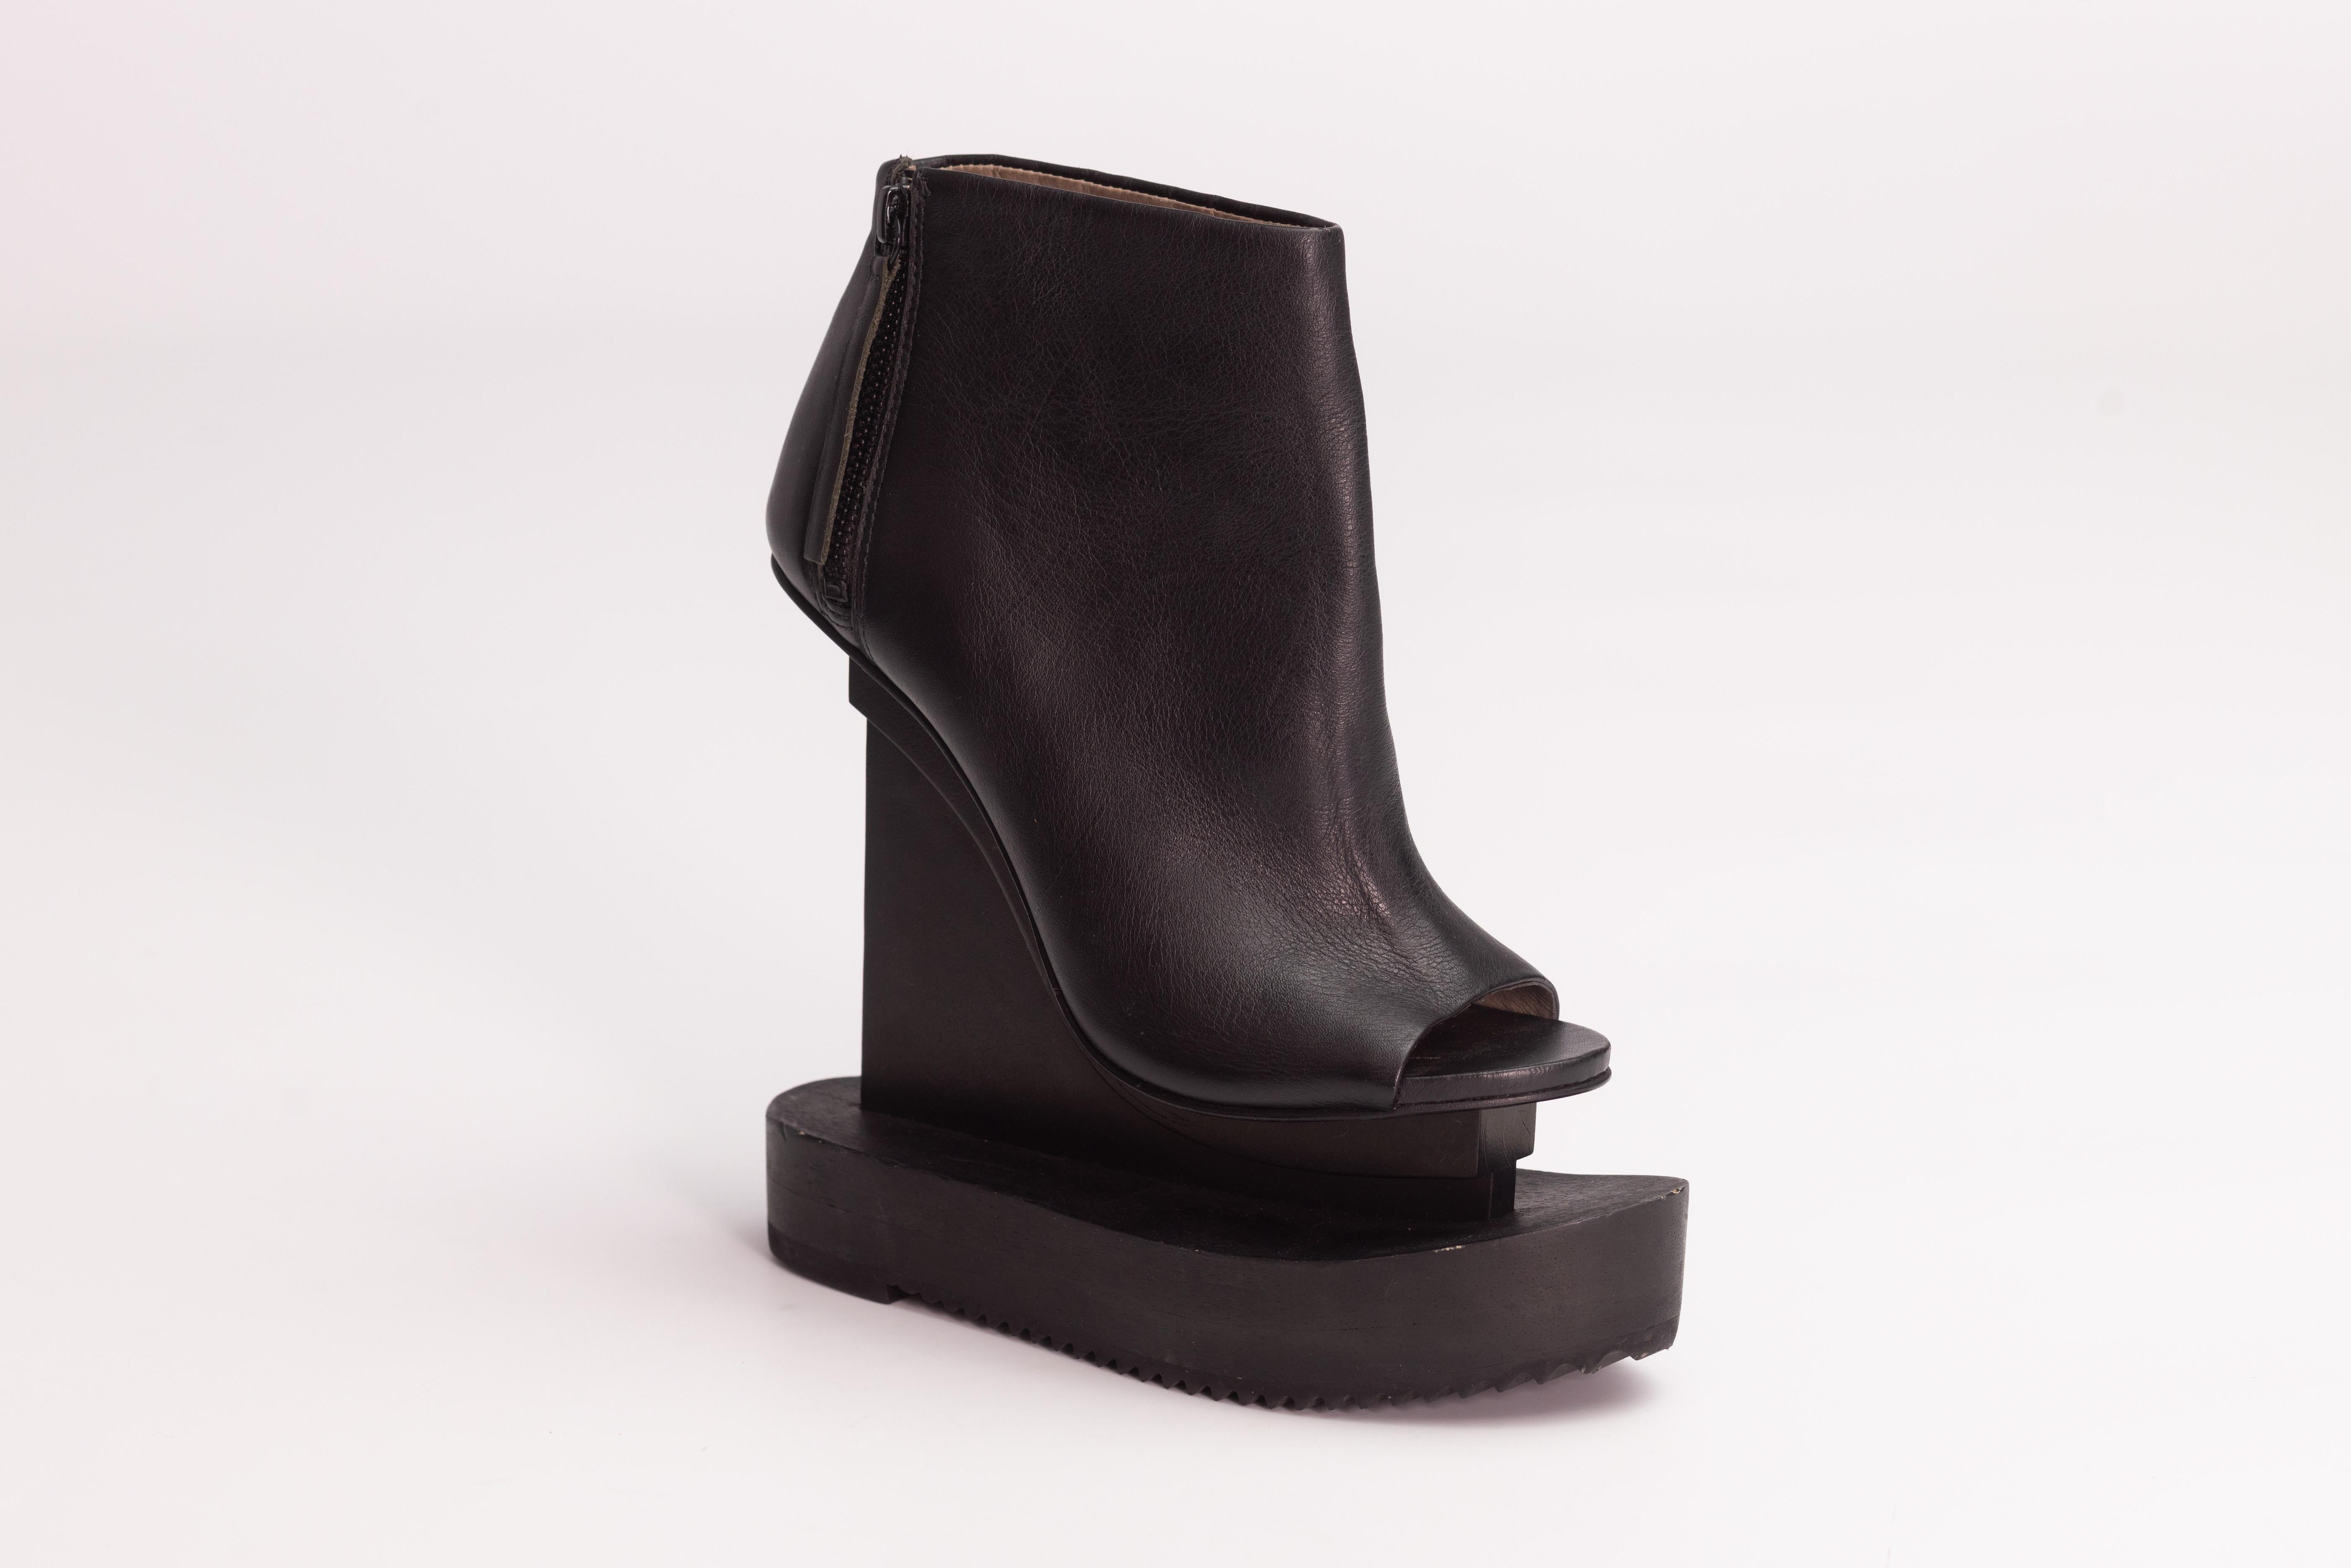 Color: Black
Material: Wood construction
Size: 37 EU / 6 US
Heel Height: 150 mm / 6”
Bottom Platform Height: 31 mm / 1.25” 
Top Platform Height: 25 mm / 1” 
Condition: Very good. Faint hairline marks to leather. Pristine.
Comes with: No brand dust